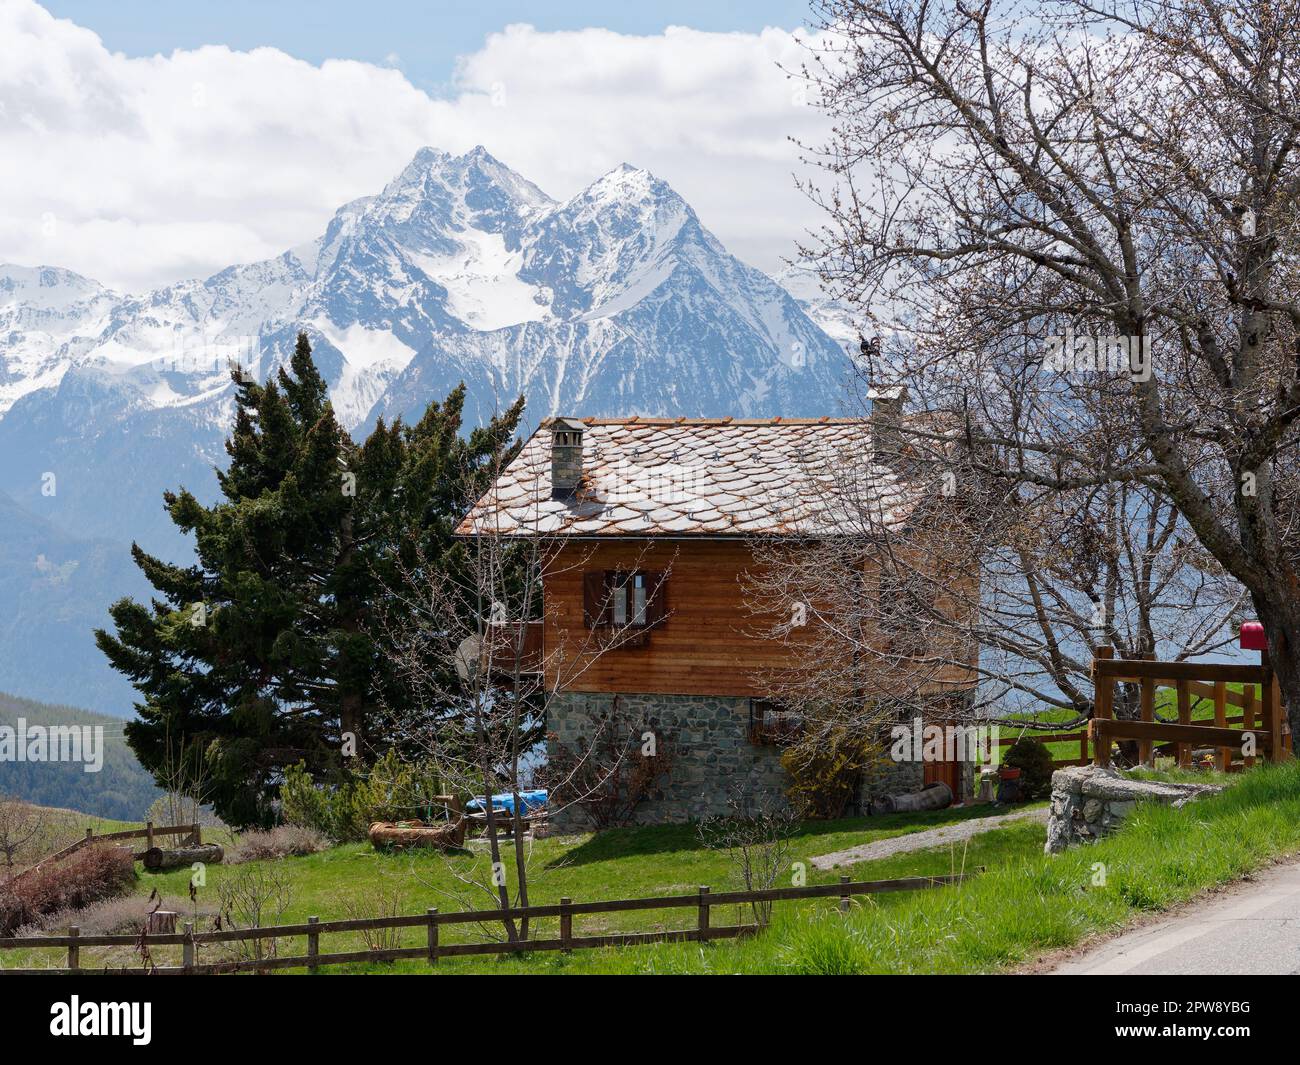 Traditional wood and stone built house in the alpine town of Lignan in the Aosta Vally, NW Italy Stock Photo